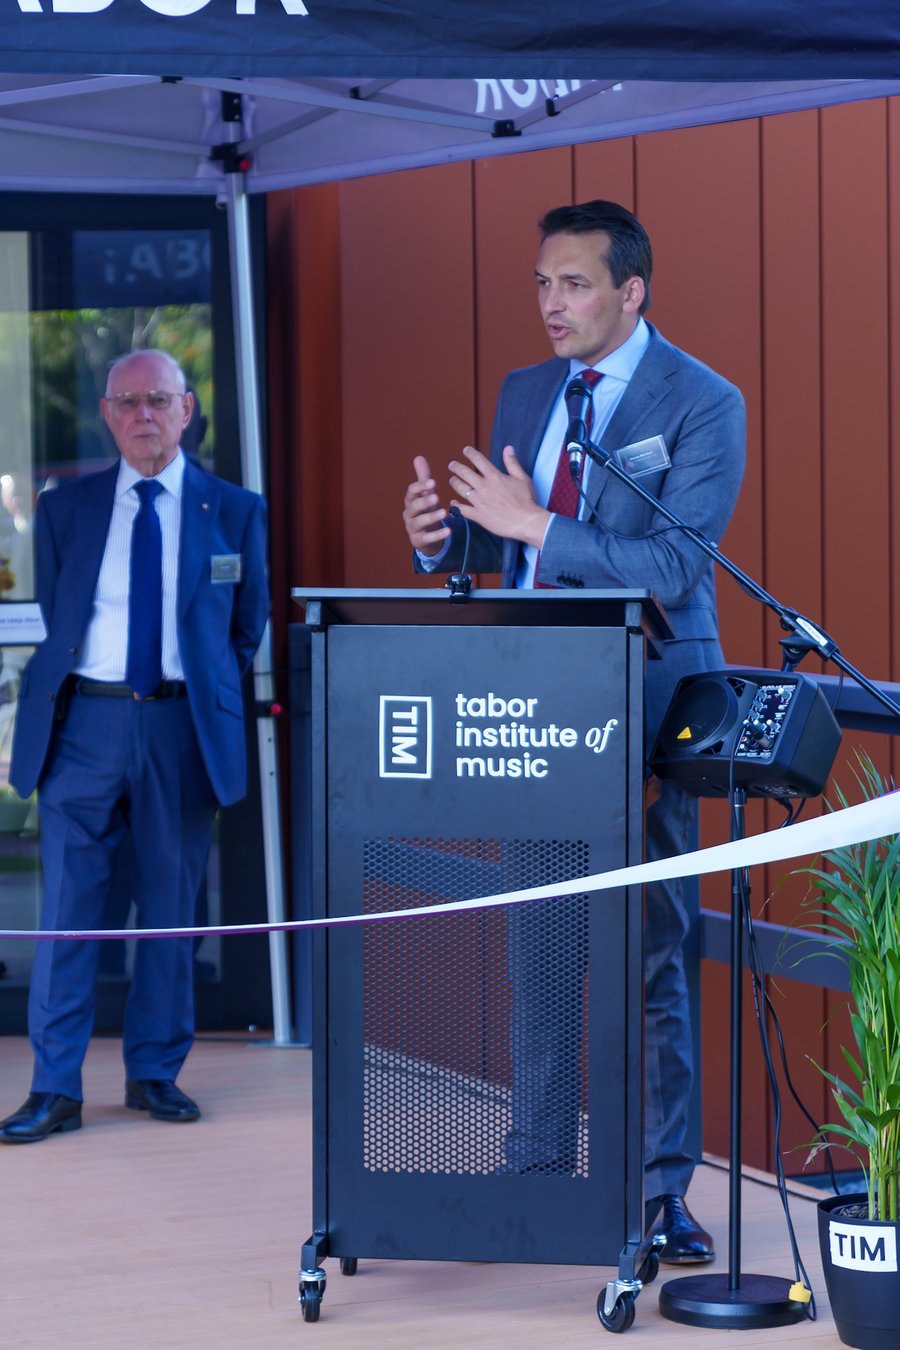 Minister Boyer Marks the Grand Opening of Tabor Institute of Music (TIM) in Millswood